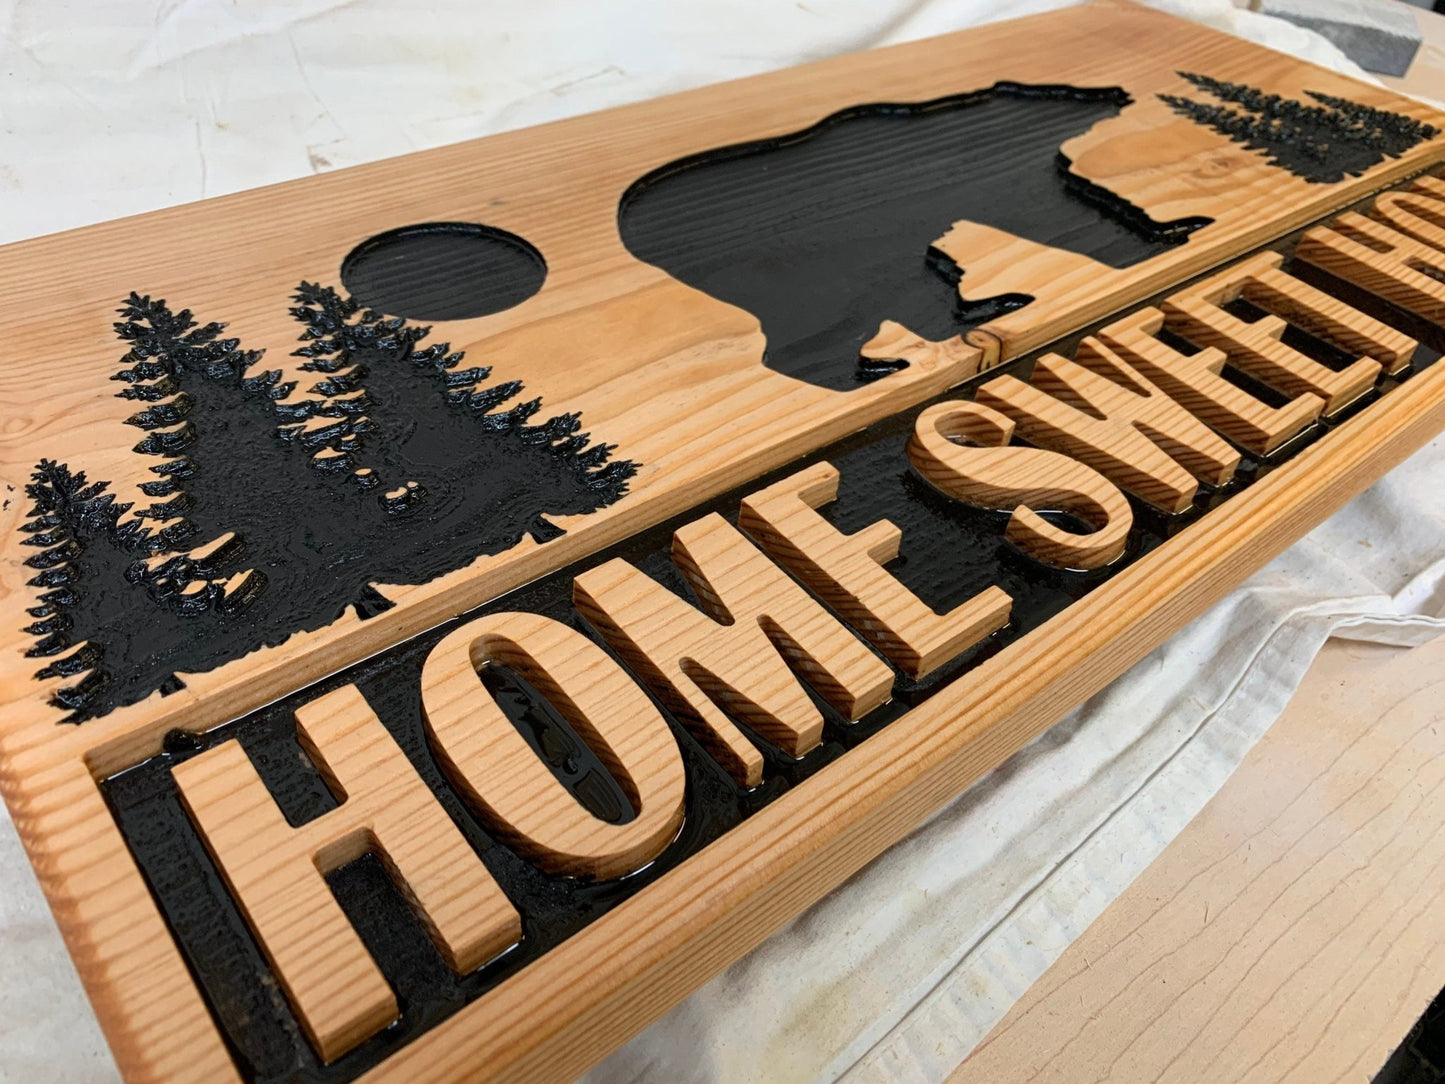 Home Sweet Home carved wood sign - Advent Wood Products